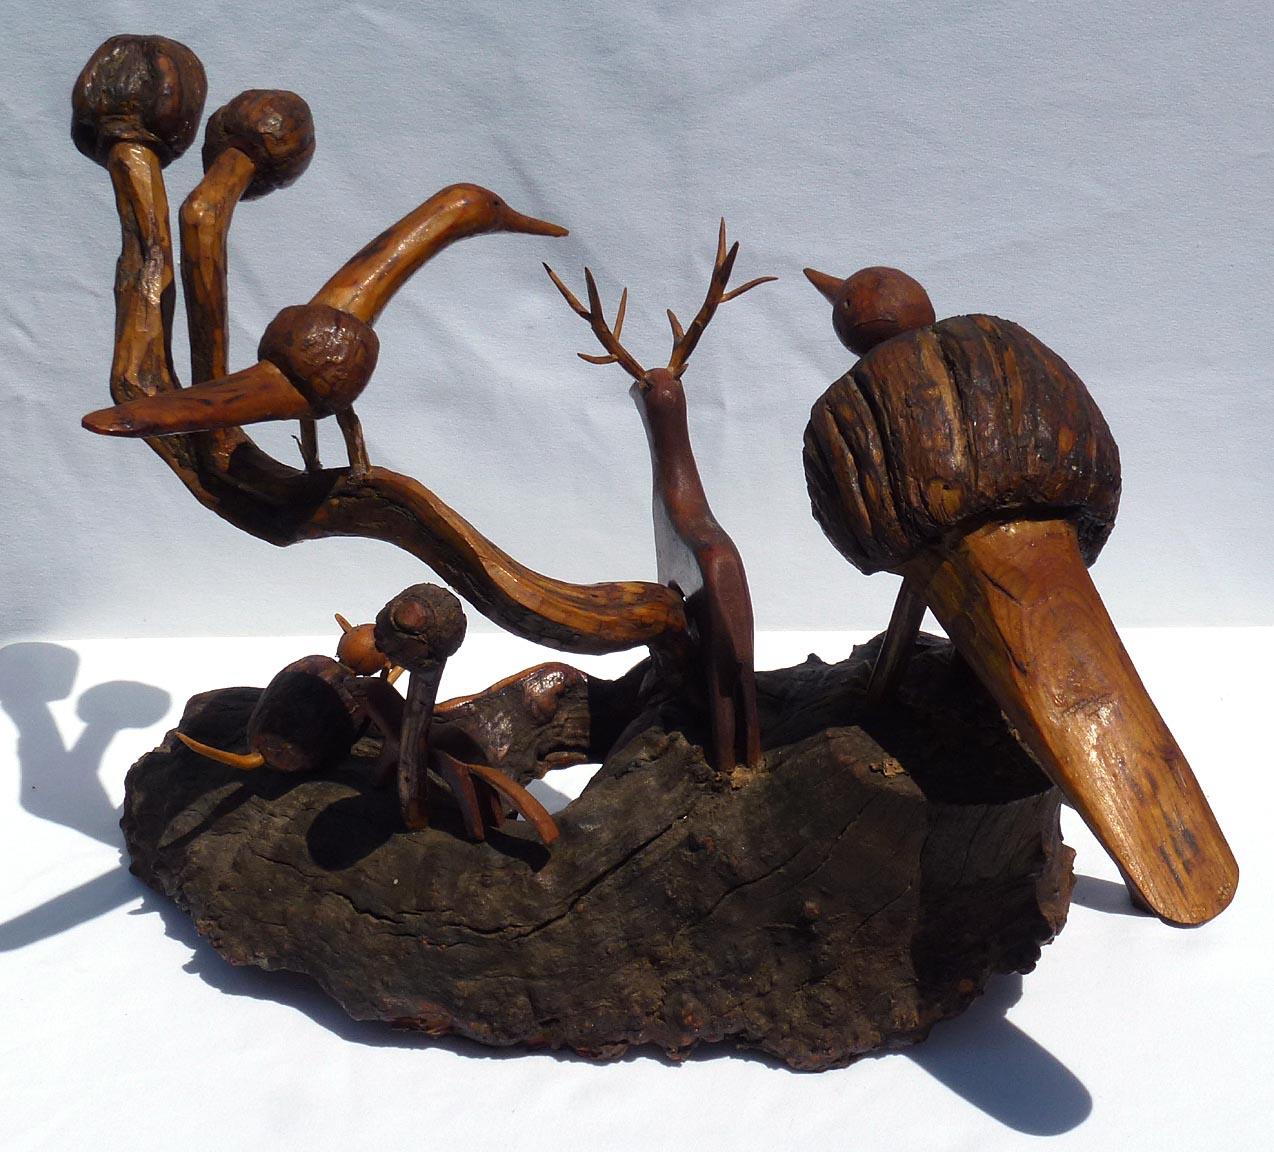 Wood Assemblage of Carved Birds and Animals by the Outsider Artist Russell Gillespie